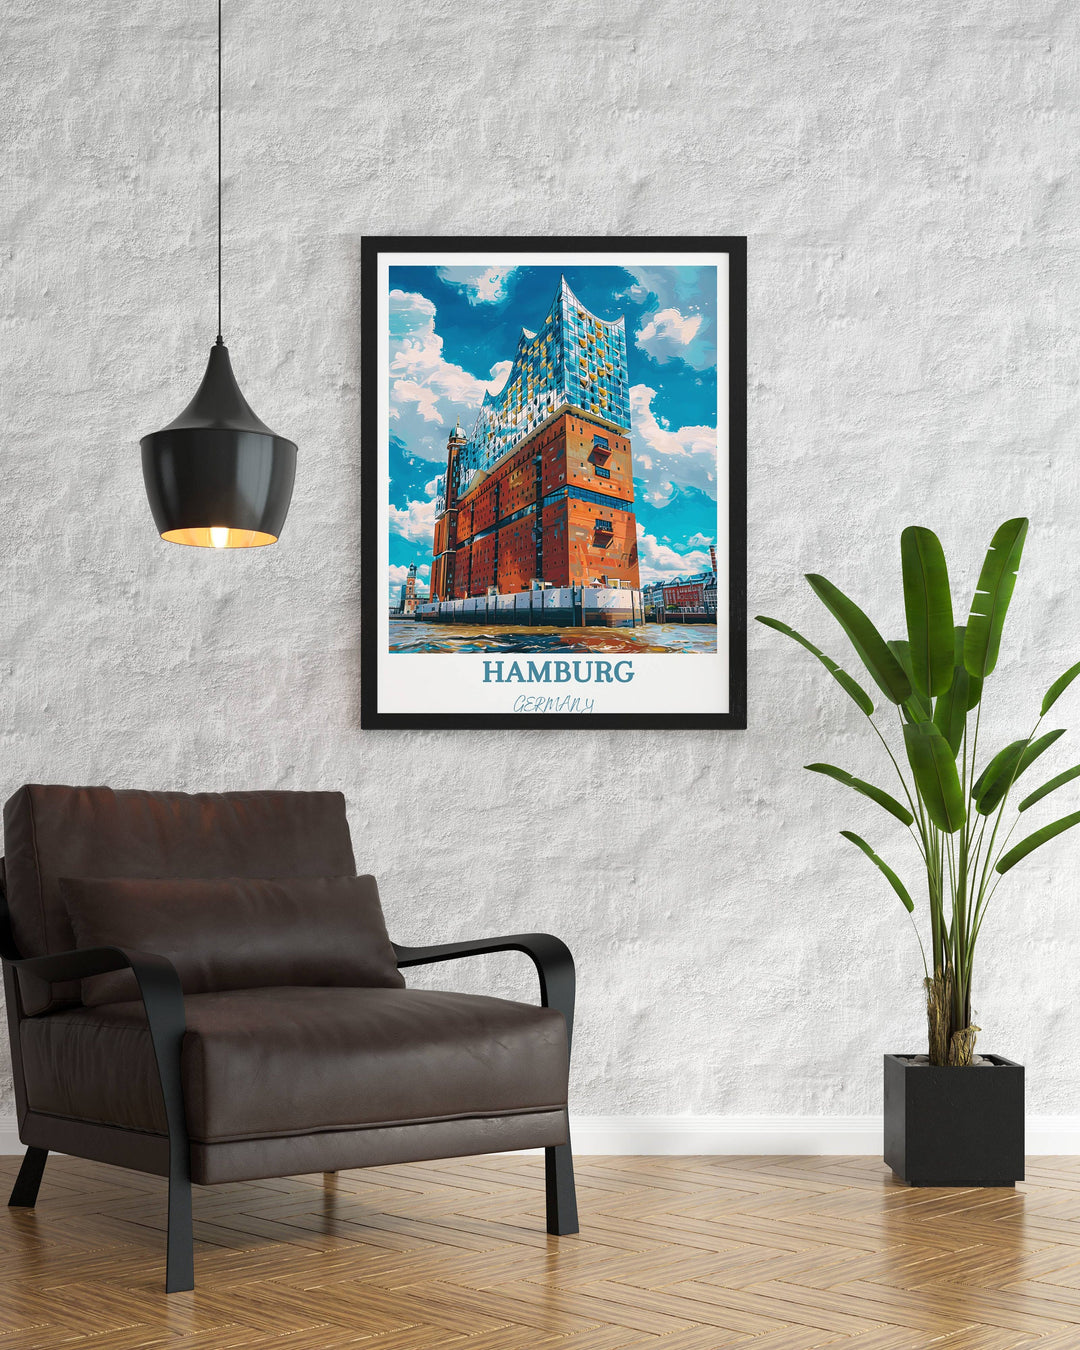 Enrich your living space with the architectural marvel of Hamburg&#39;s Elbphilharmonie through this captivating Germany art print. An ideal Germany souvenir